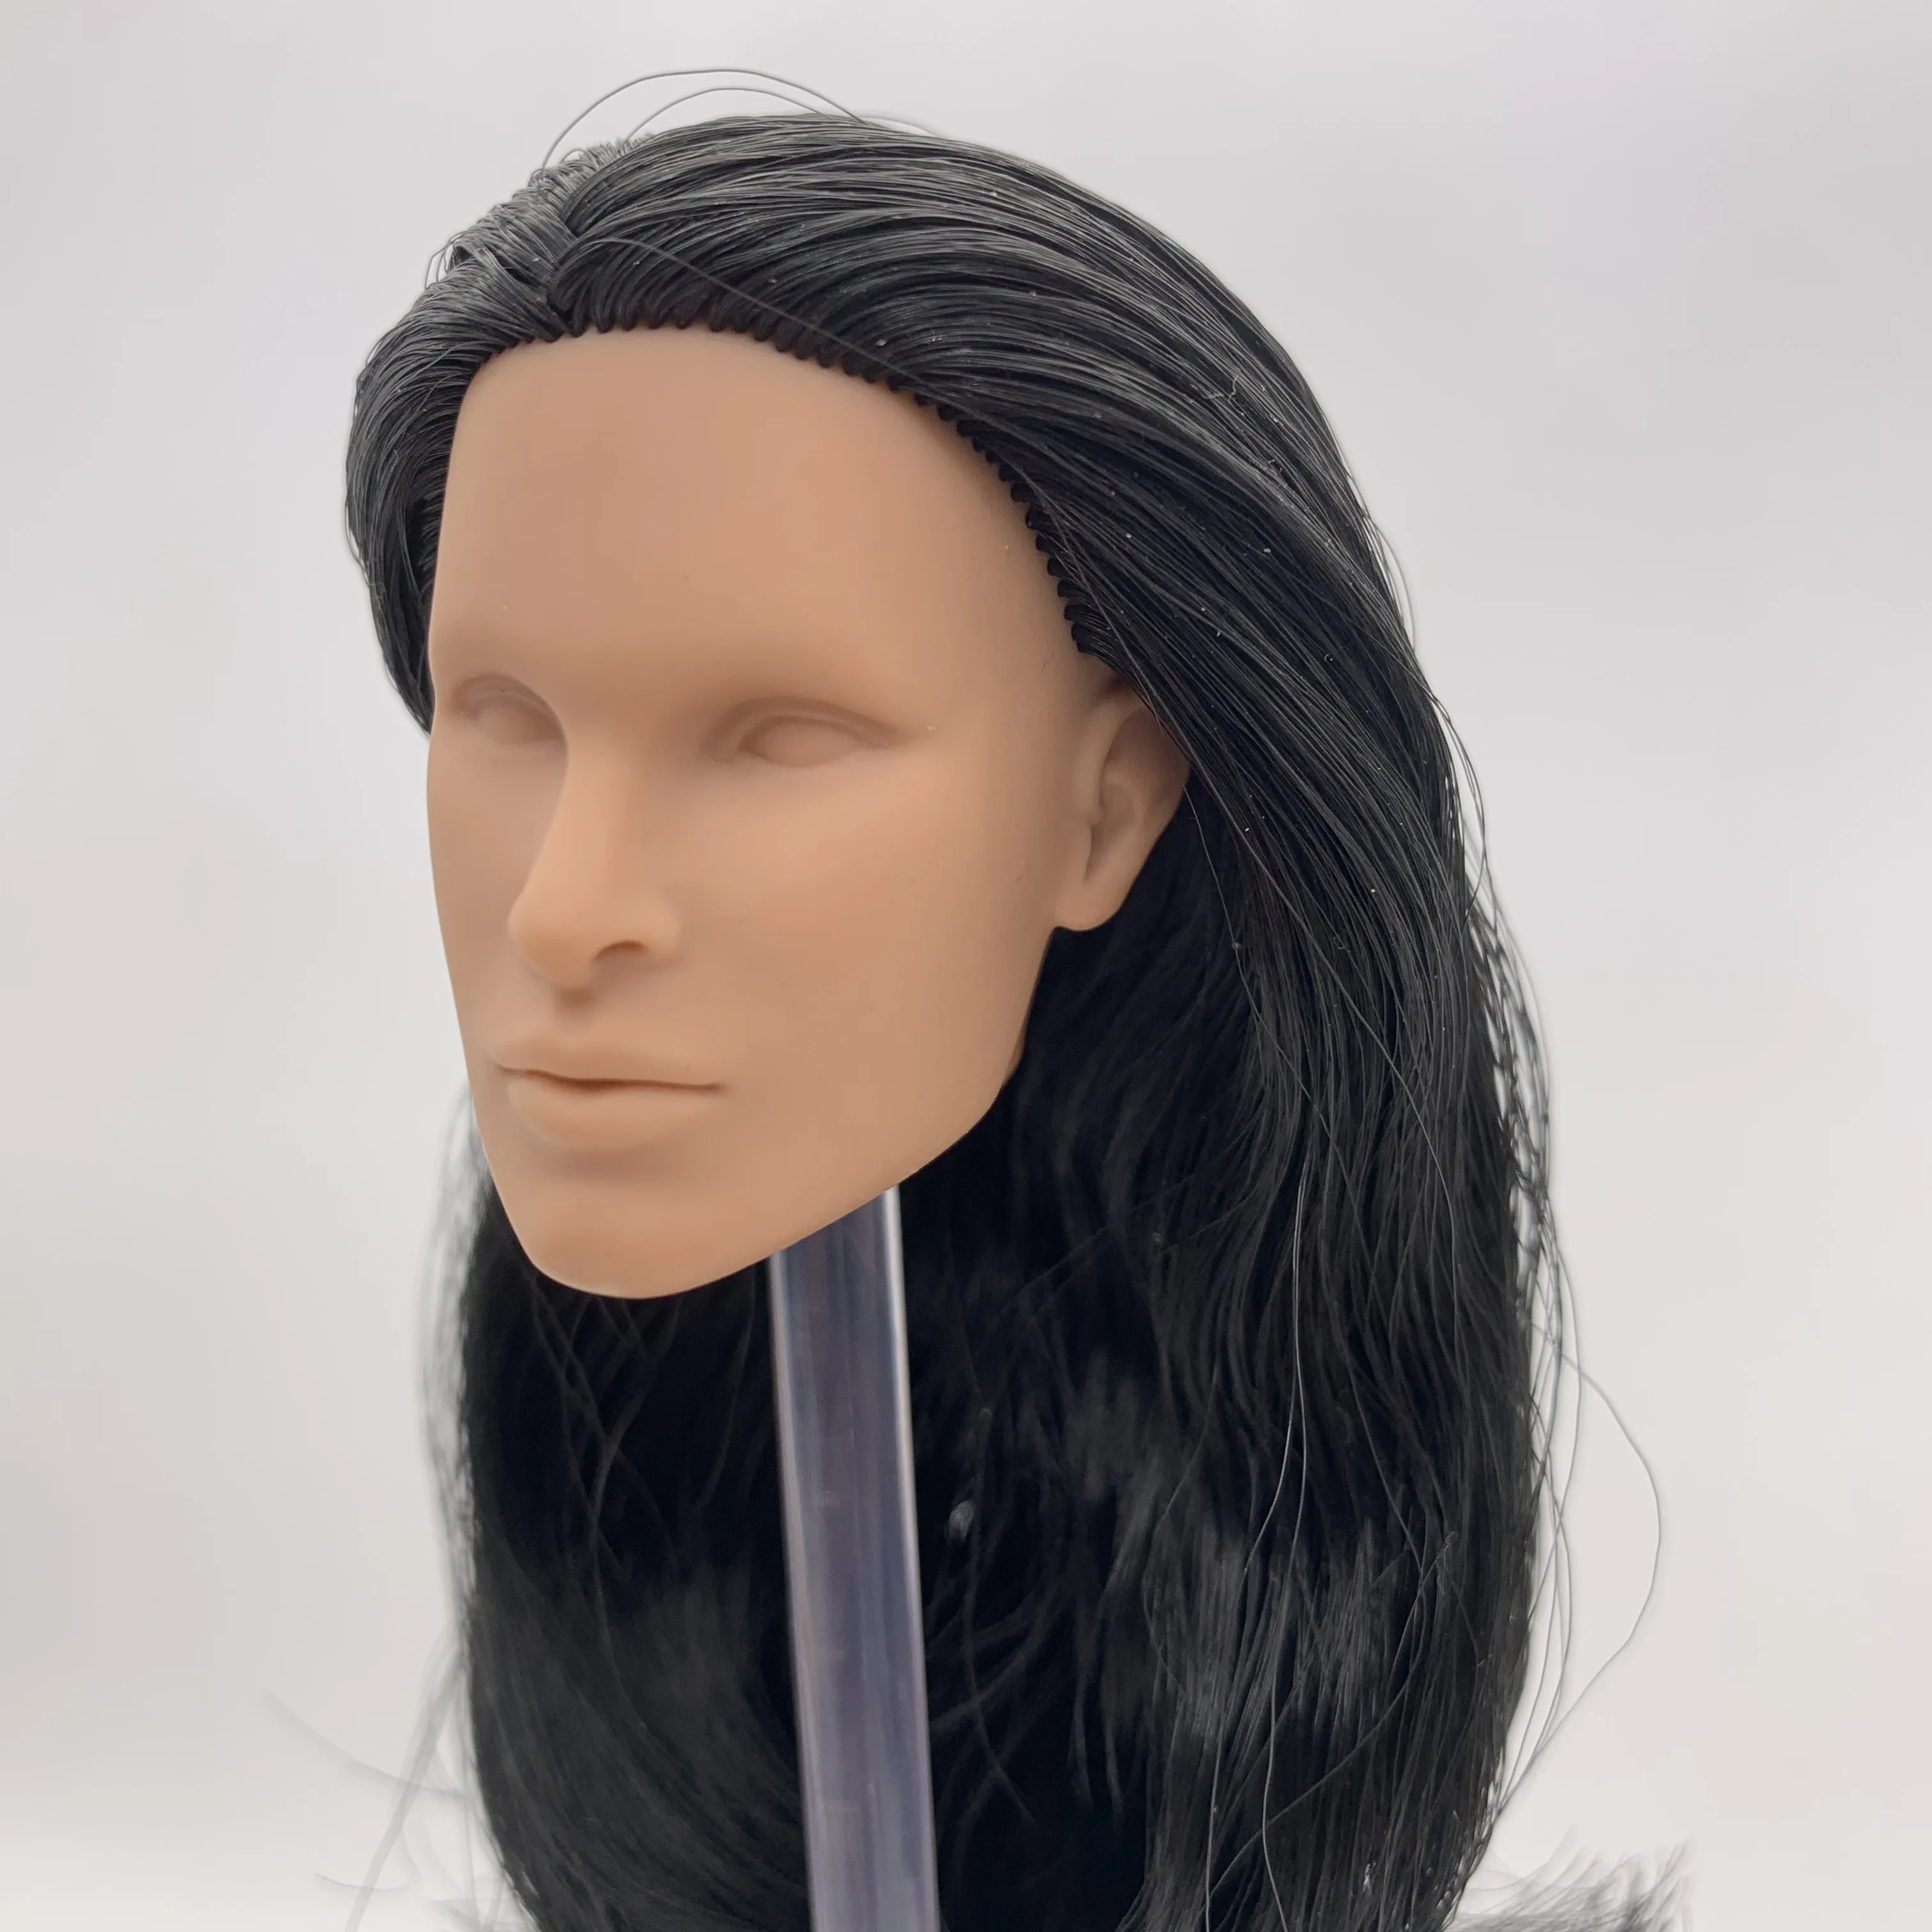 

Fashion Royalty Callum Windsor White Skin Black Hair Rerooted Integrity 1/6 Scale Male Doll Unpanited Head